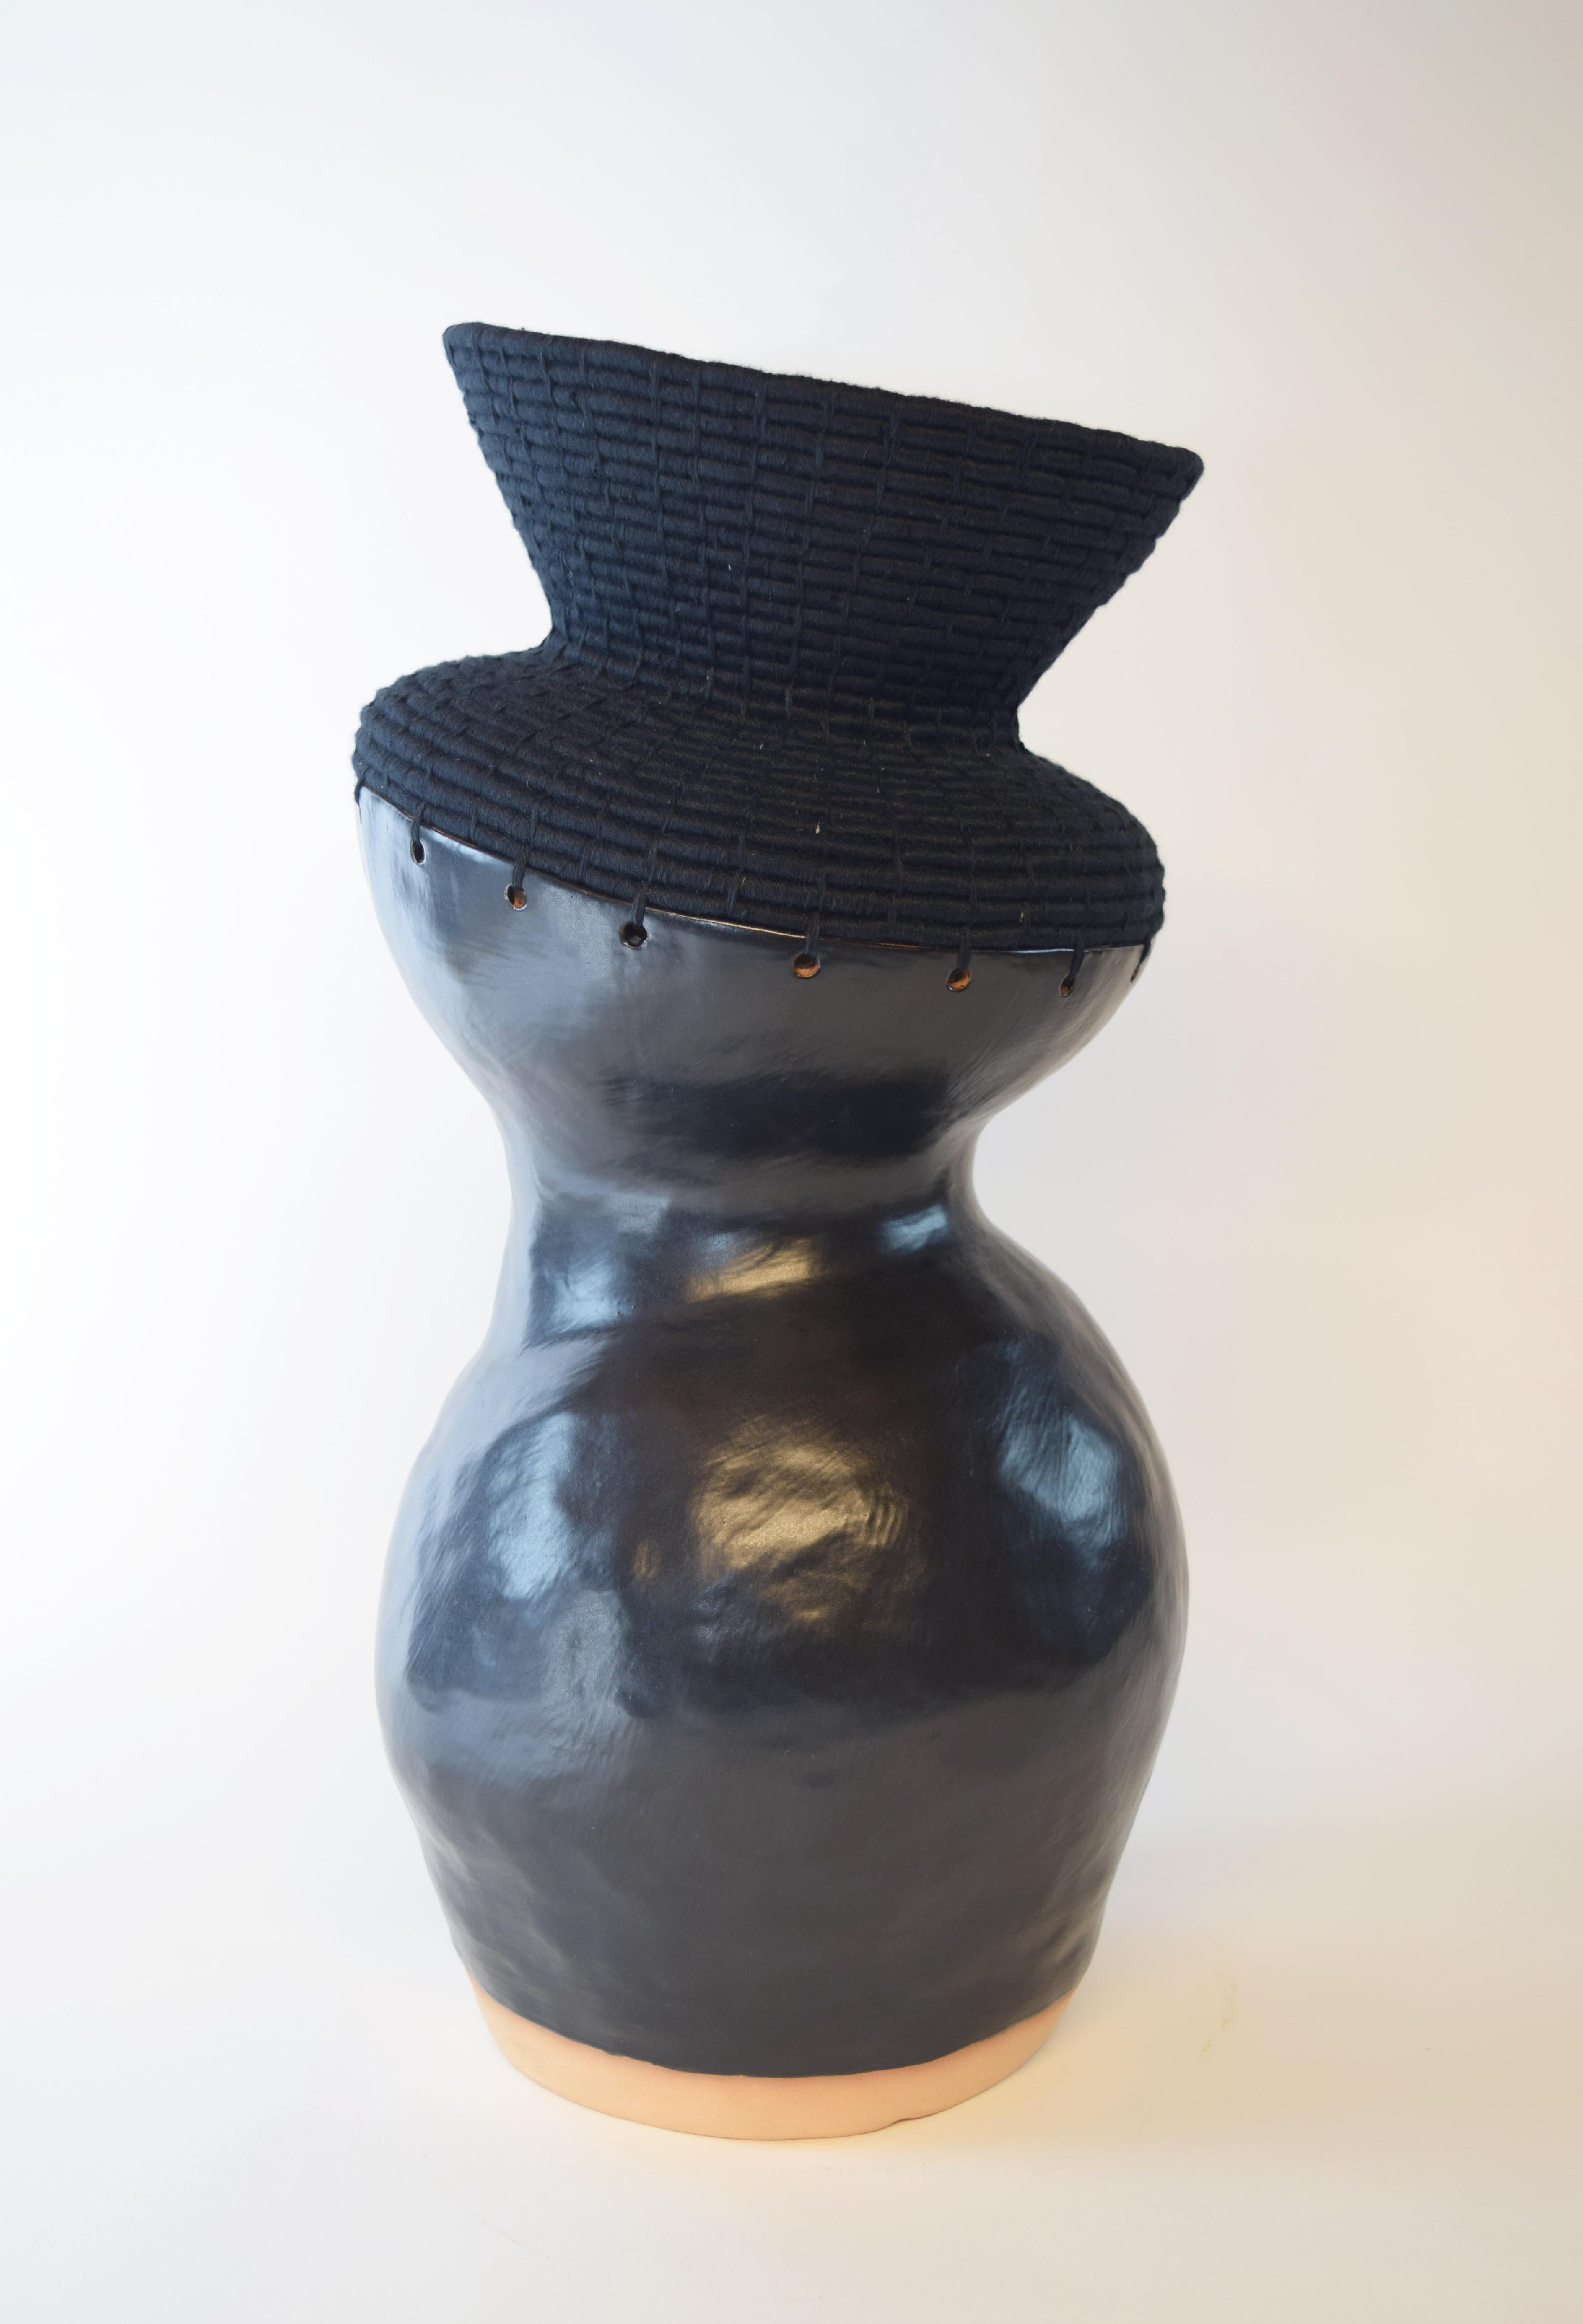 One of a kind Vessel #761 by Karen Gayle Tinney

Hand formed stoneware base with satin black glaze. The top part is woven in black cotton. 

18.25”H x 8”W

One of a kind collections are released periodically throughout the year. Each piece is